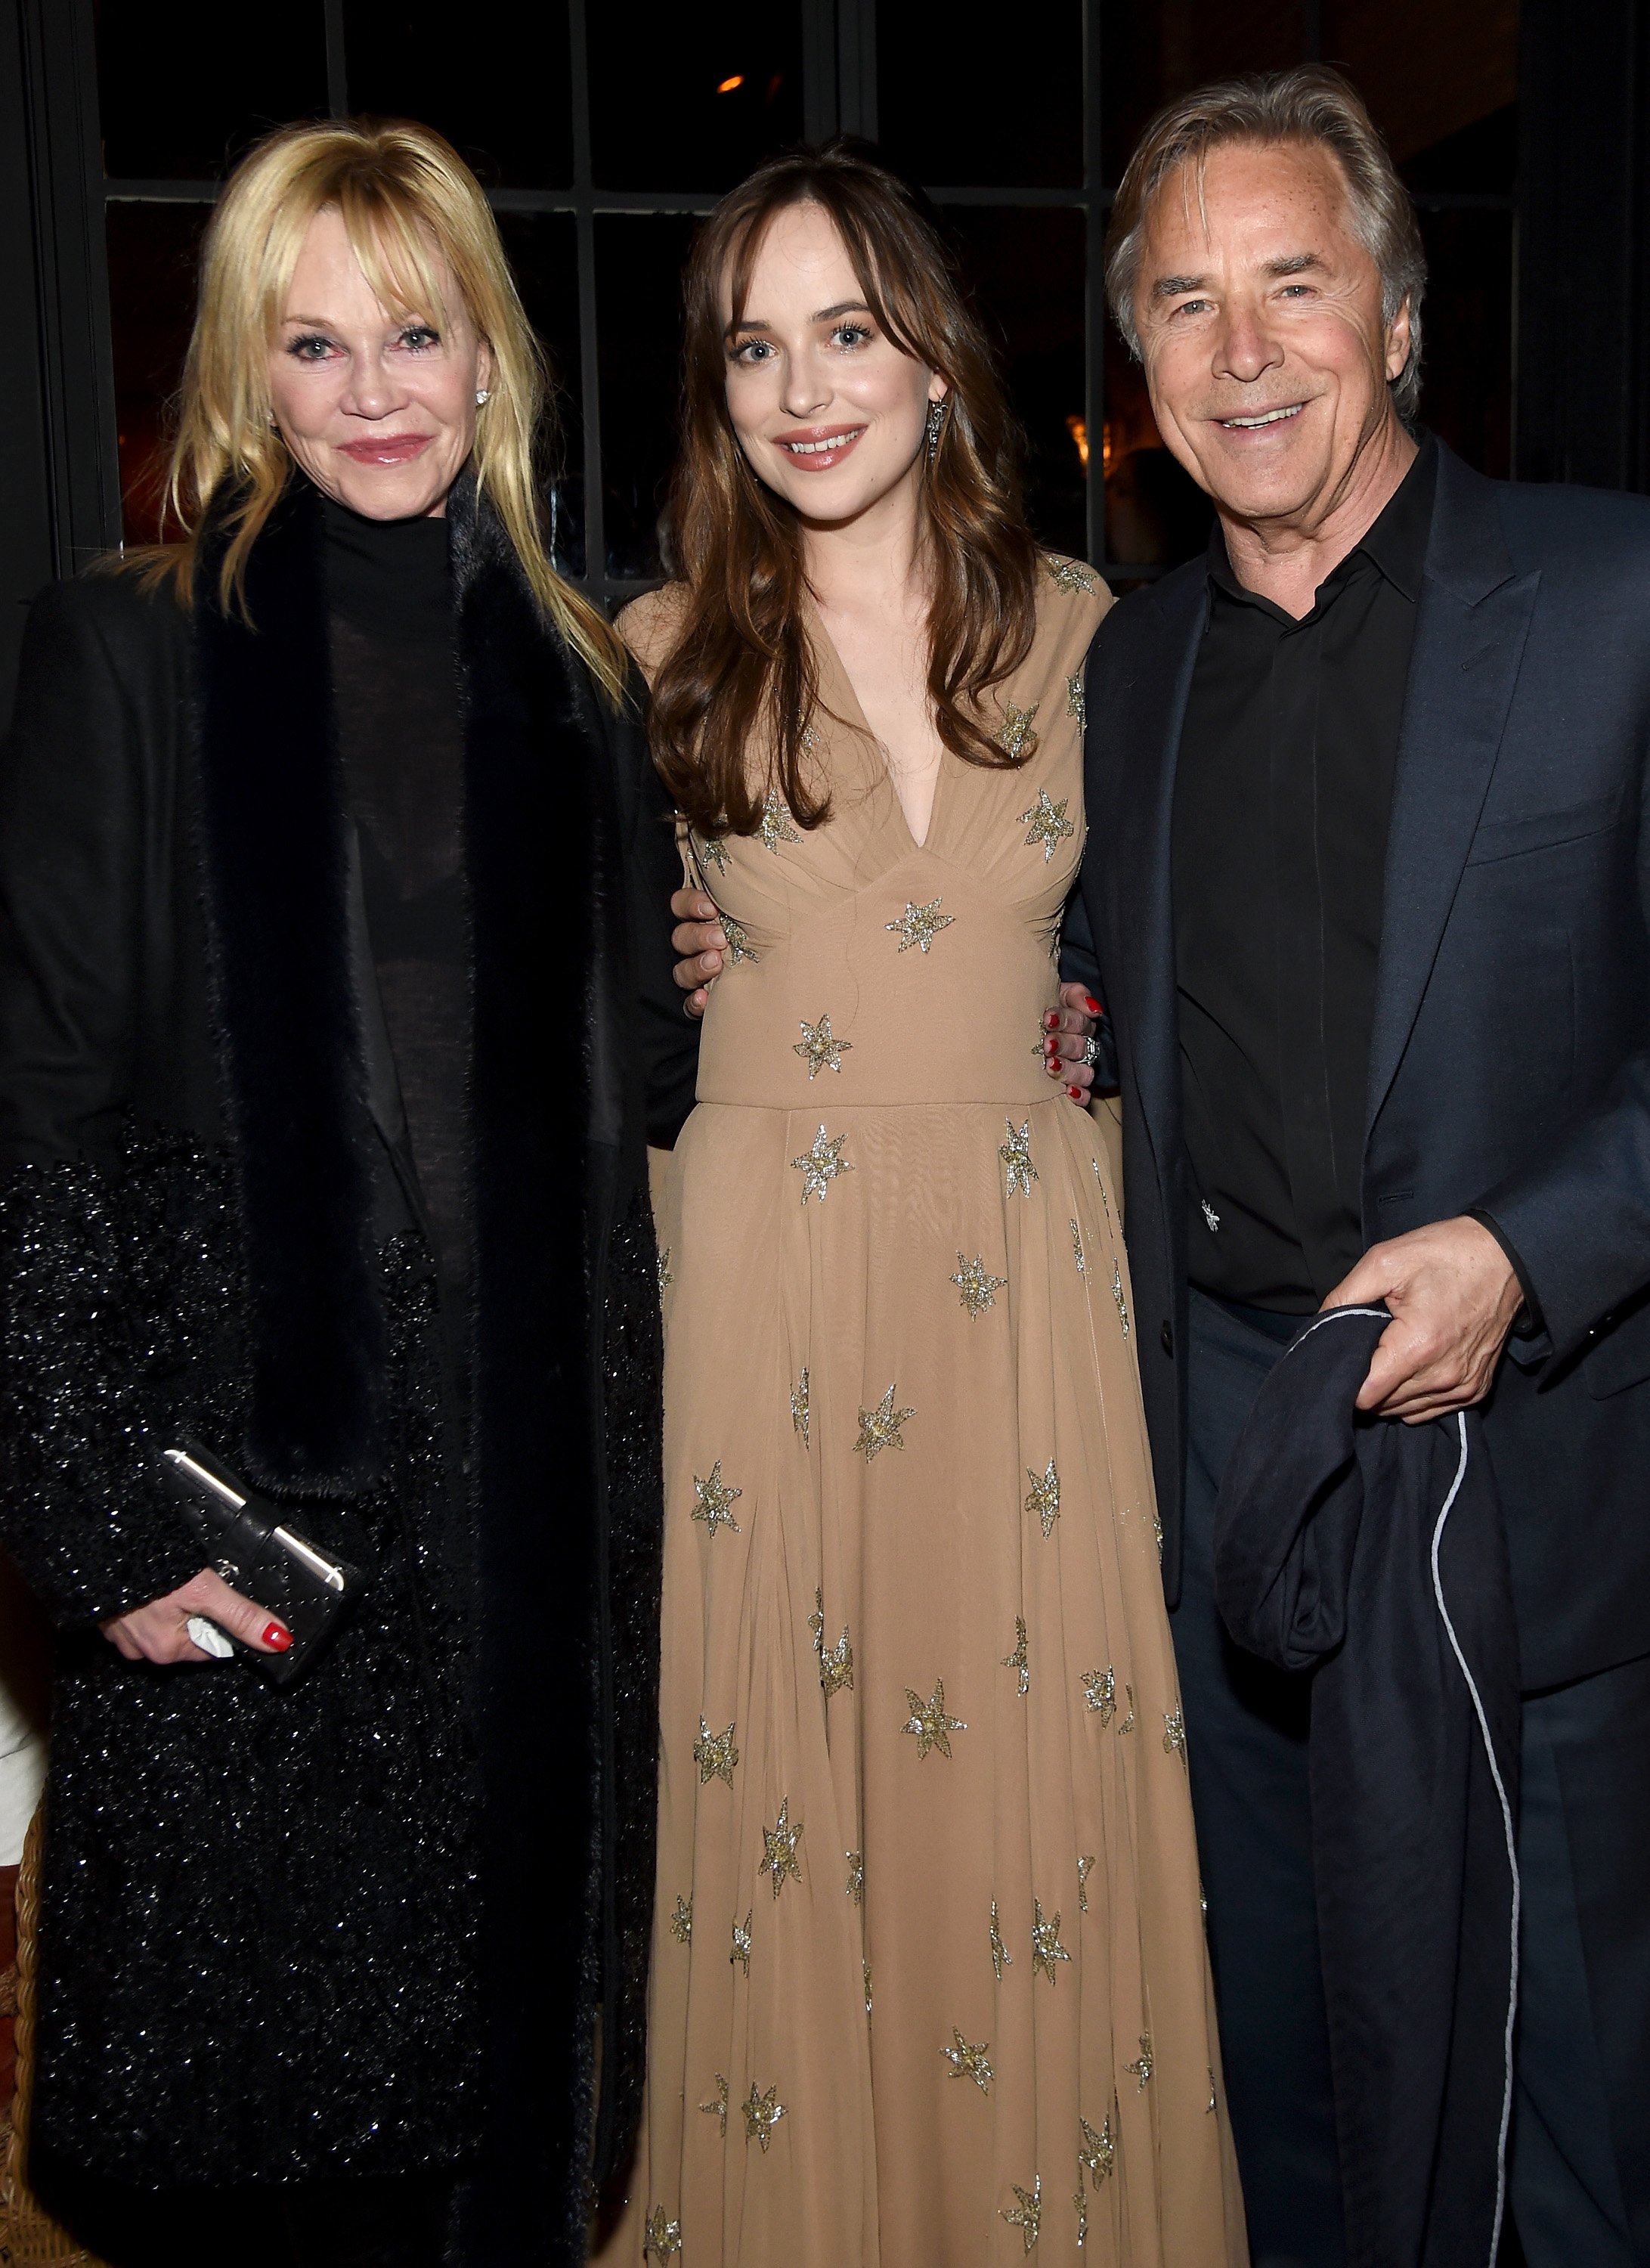 Melanie Griffith, Dakota Johnson, and Don Johnson attend an after-party in New York City on February 3, 2016 | Photo: Getty Images